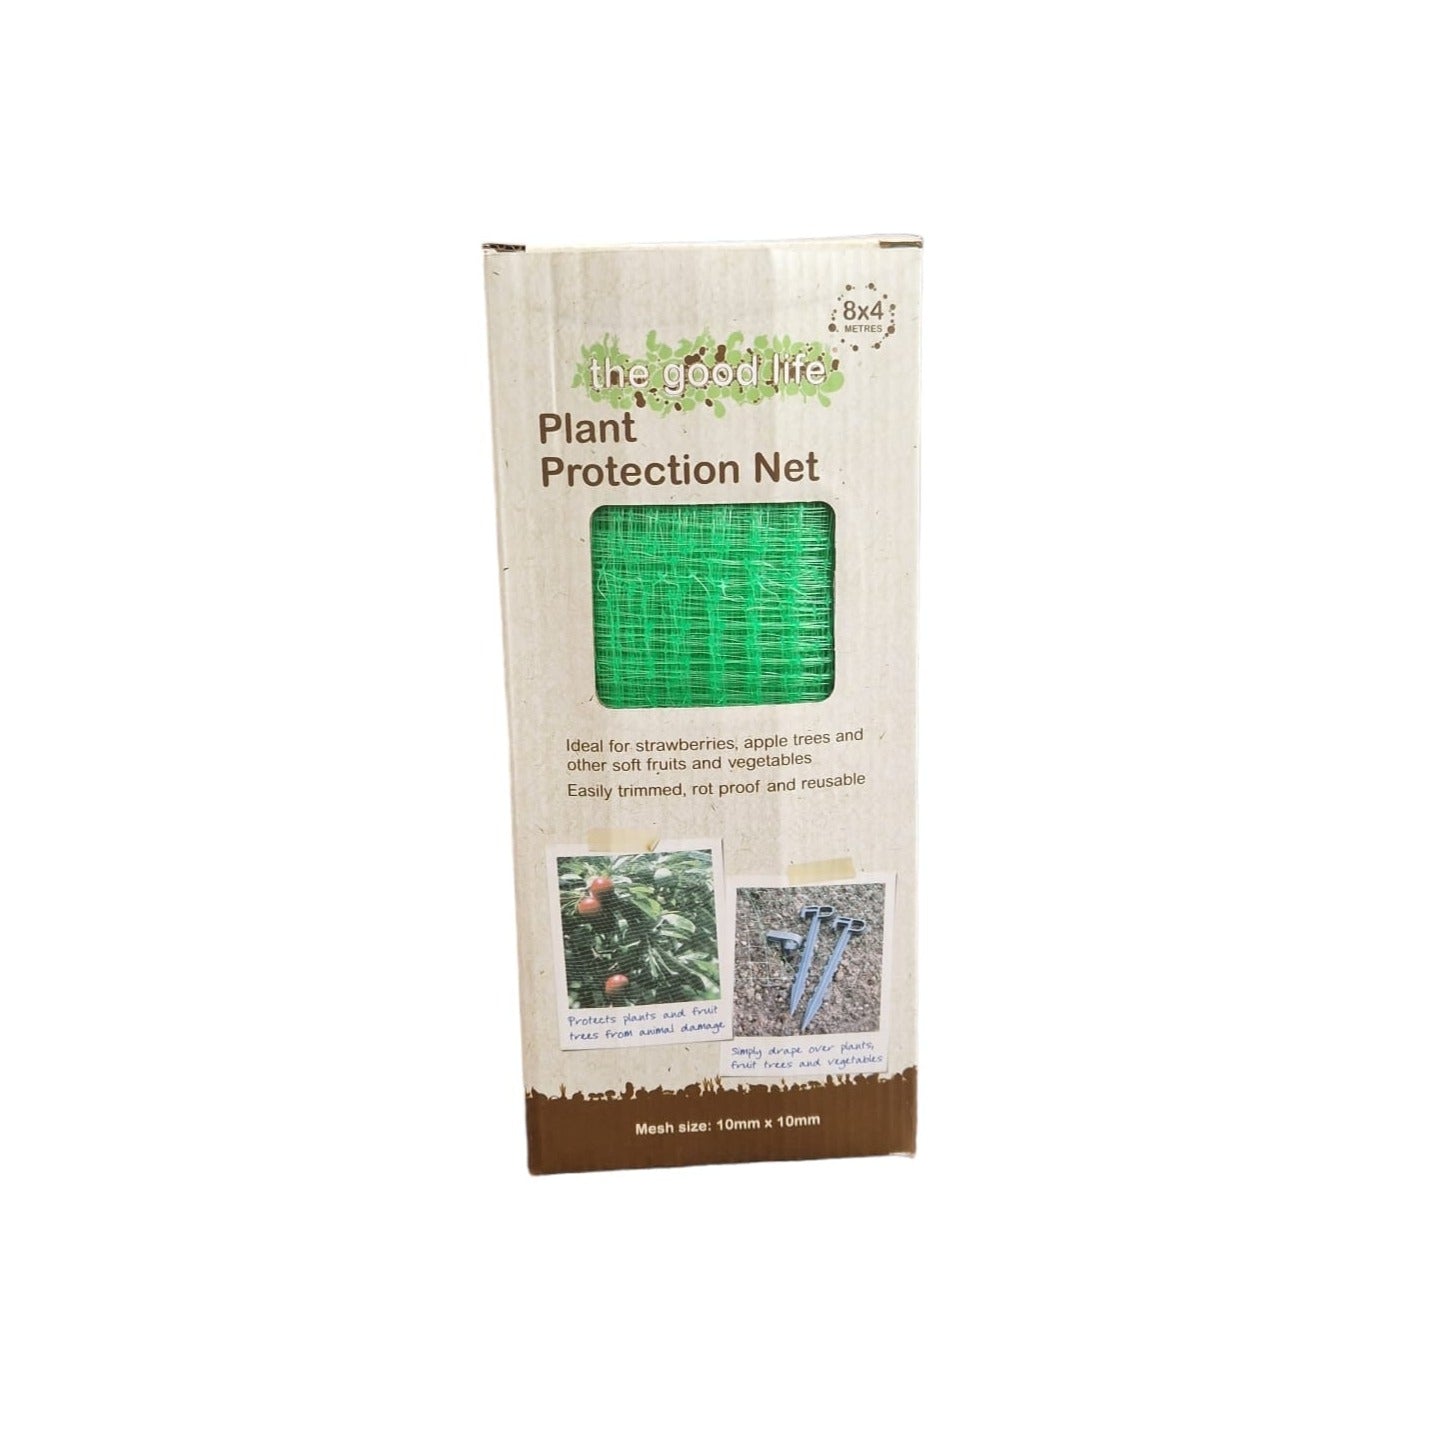 The Good Life Plant Protection Net 8m x 4m